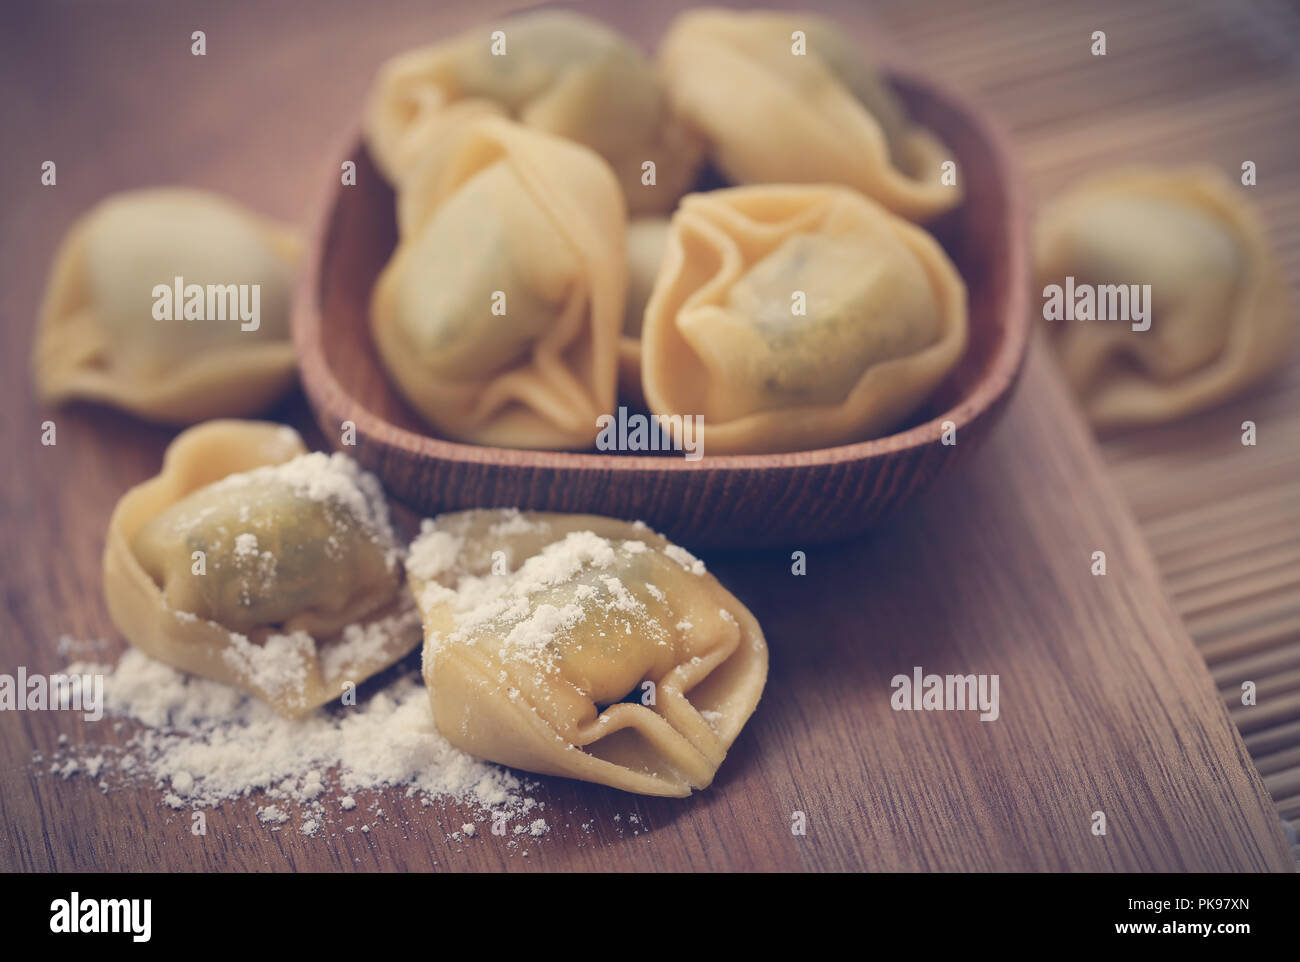 Italian Tortelloni made of spinach with flour on wooden surface Stock Photo